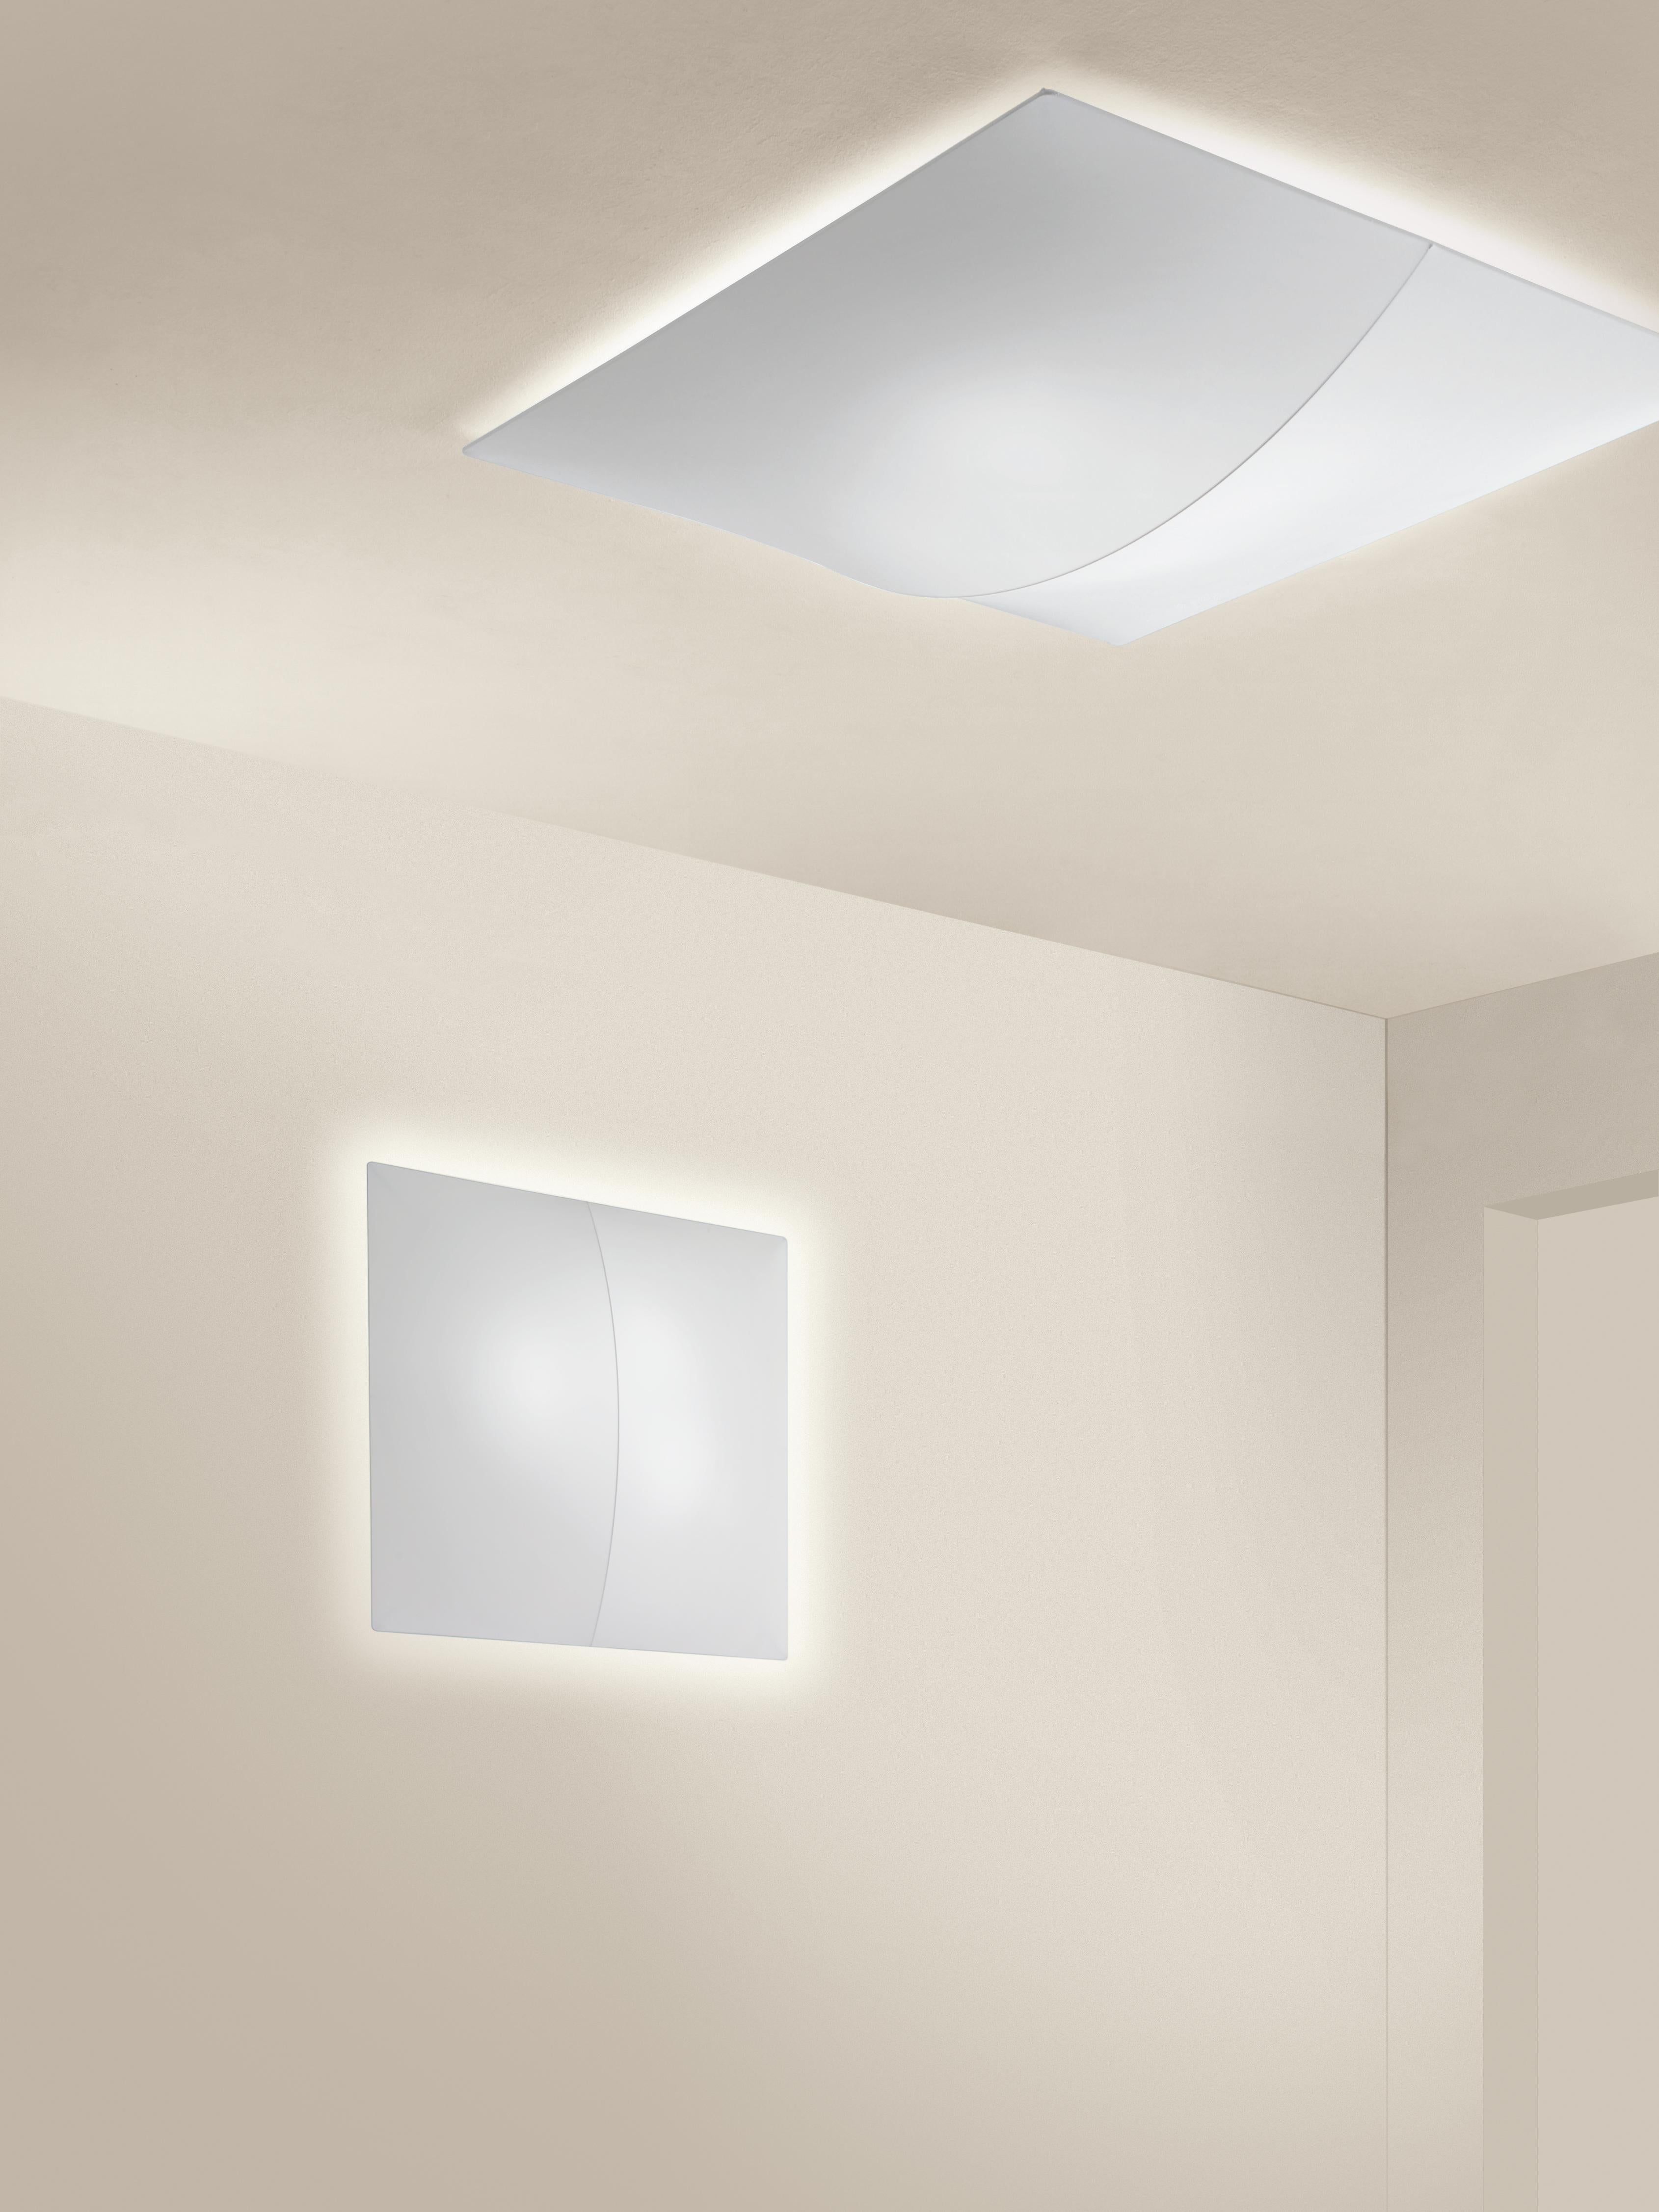 Axolight Large 140 Nelly Wall Lamp in White by Manuel & Vanessa Vivian

Geometric simplicity and a discreet game of light and shade. Nelly is the purity of a white canvas interrupted by a linear trace that gently crosses it, emphasizing reflections